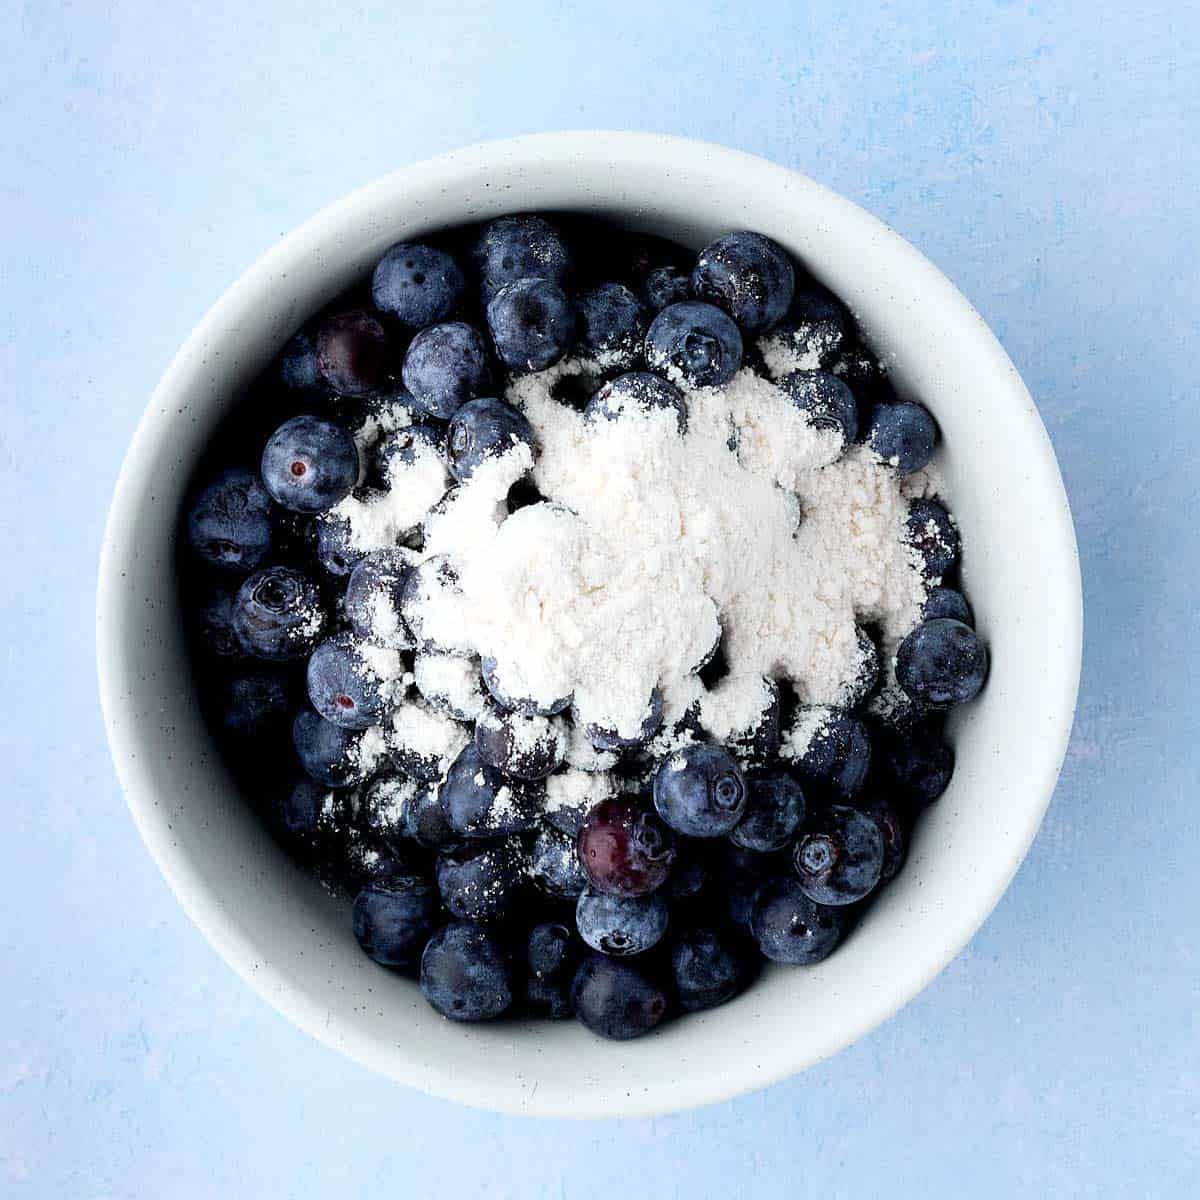 Bowl of fresh blueberries with a tablespoon of flour added, right before it is stirred to coat the blueberries.